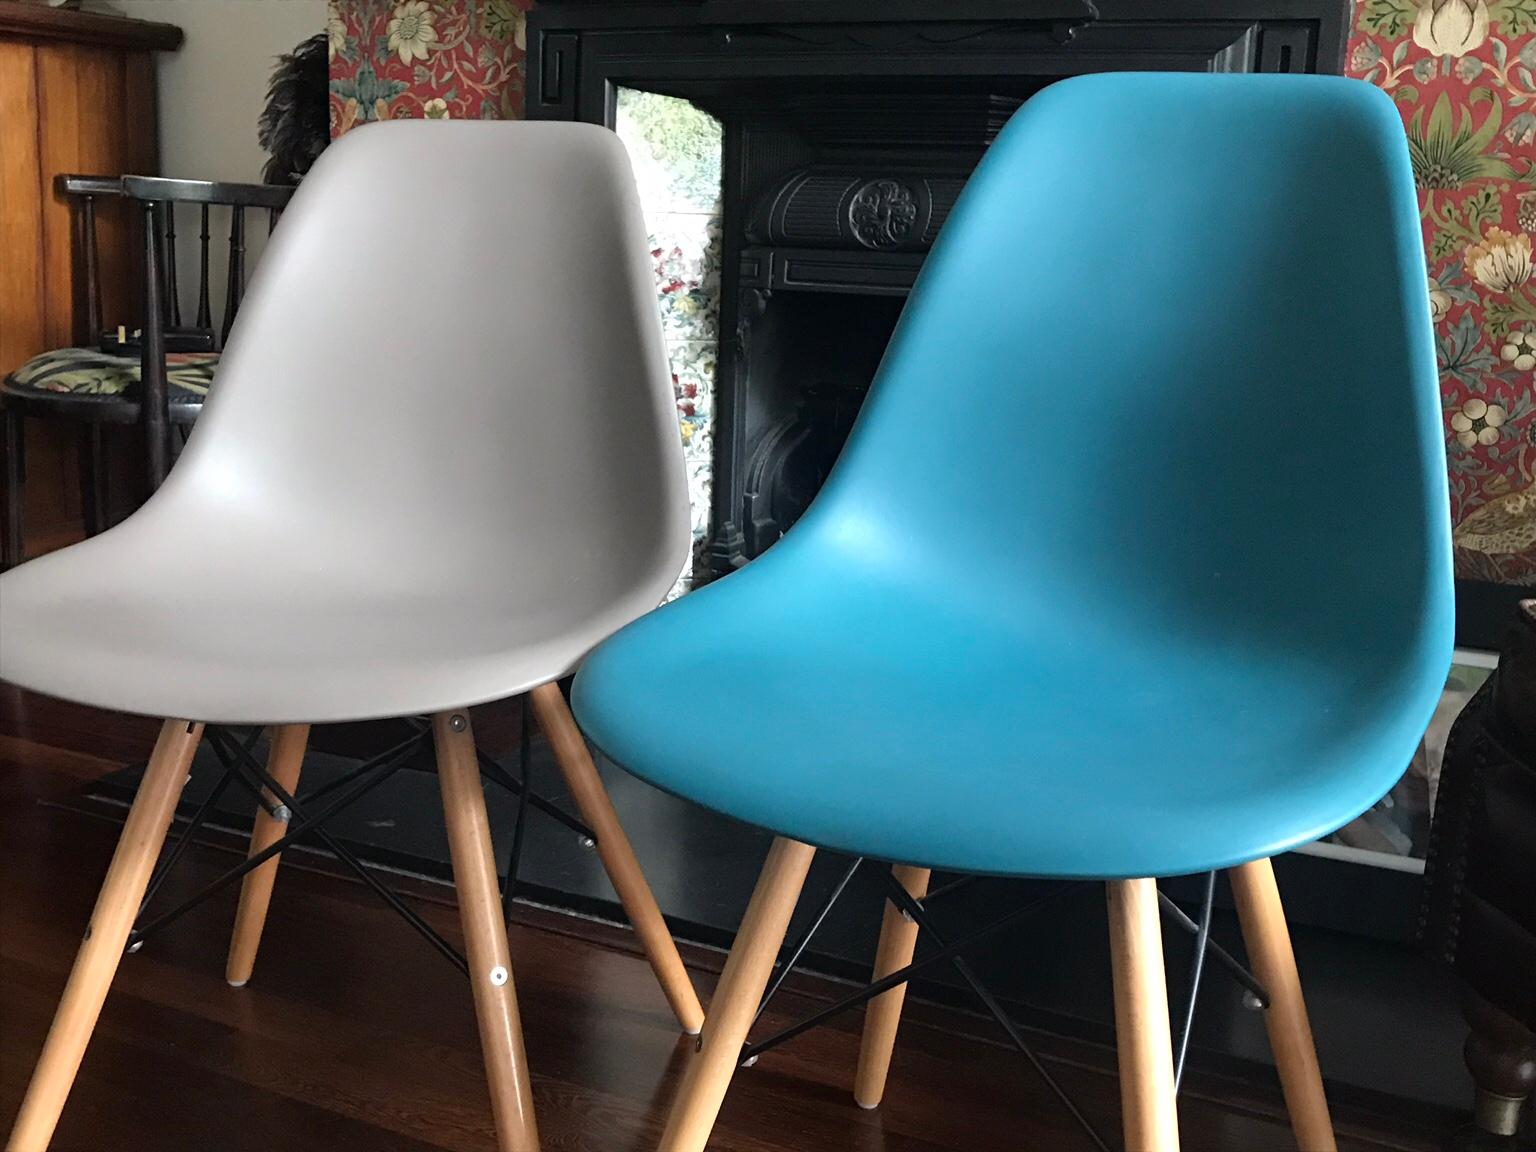 Dwell Chairs 4 2 Grey 2 Turquoise In Ig1 London Fur 80 00 Zum